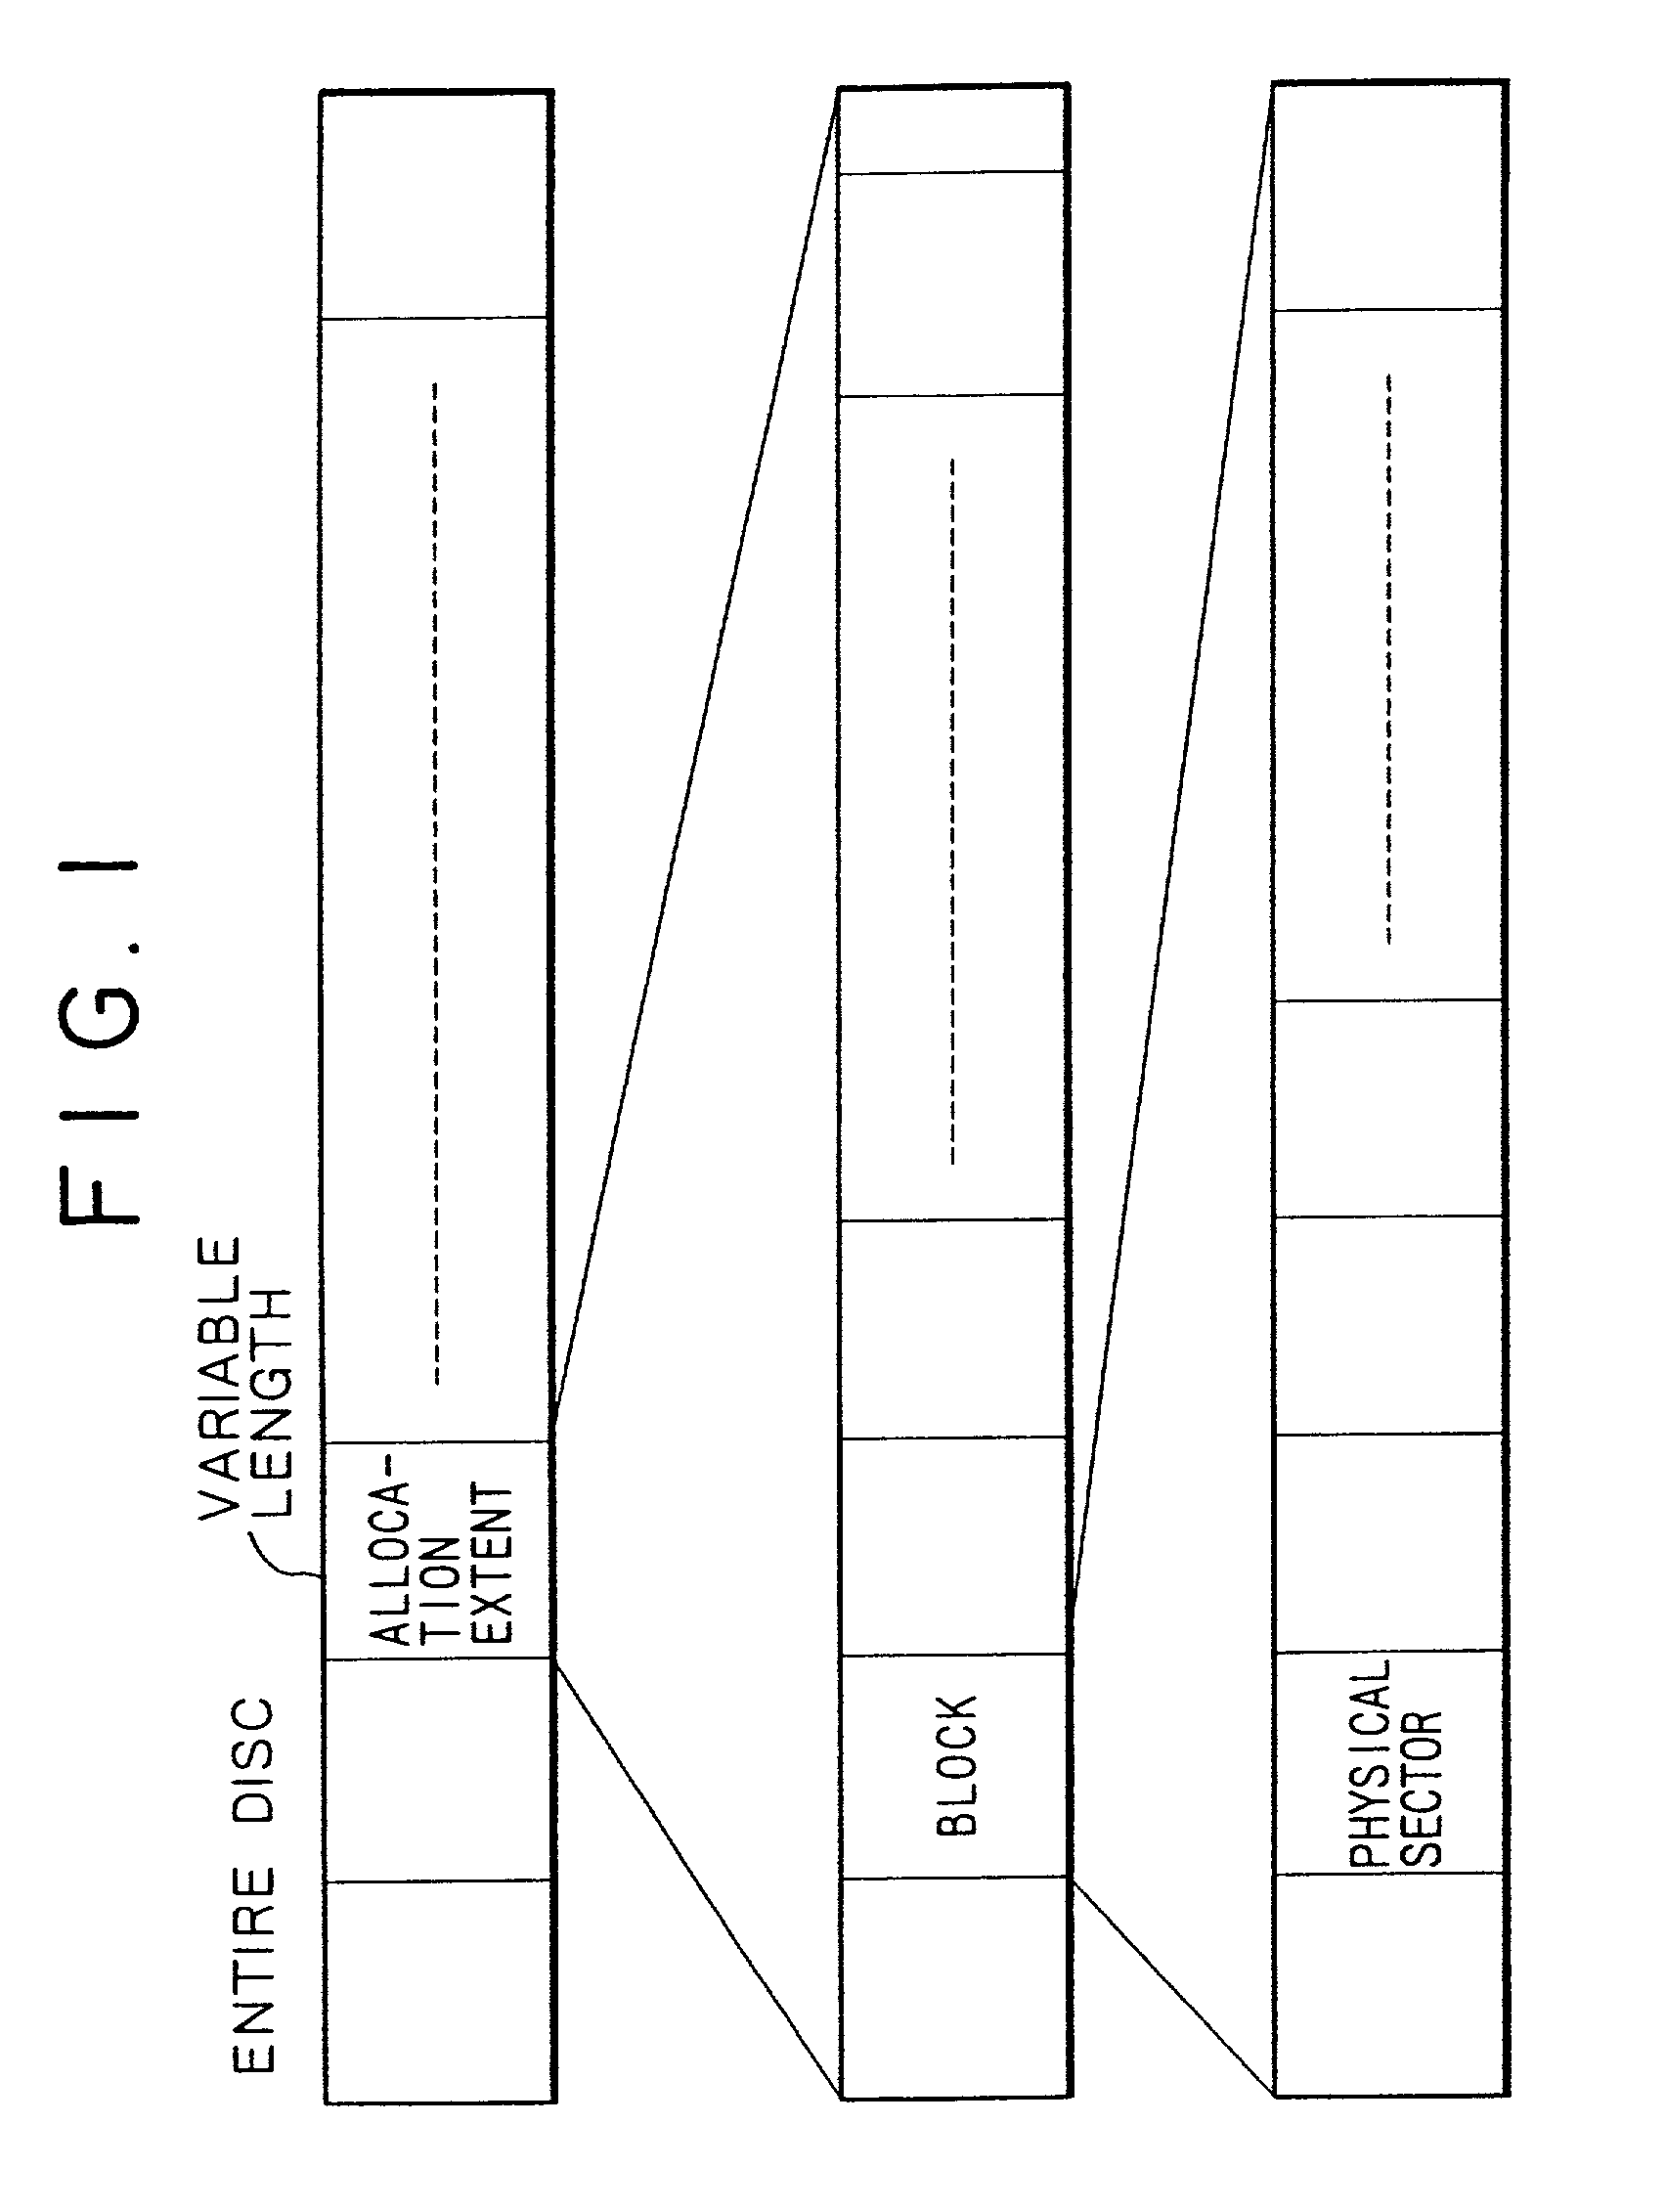 Recording and/or reproduction apparatus, file management method and providing medium